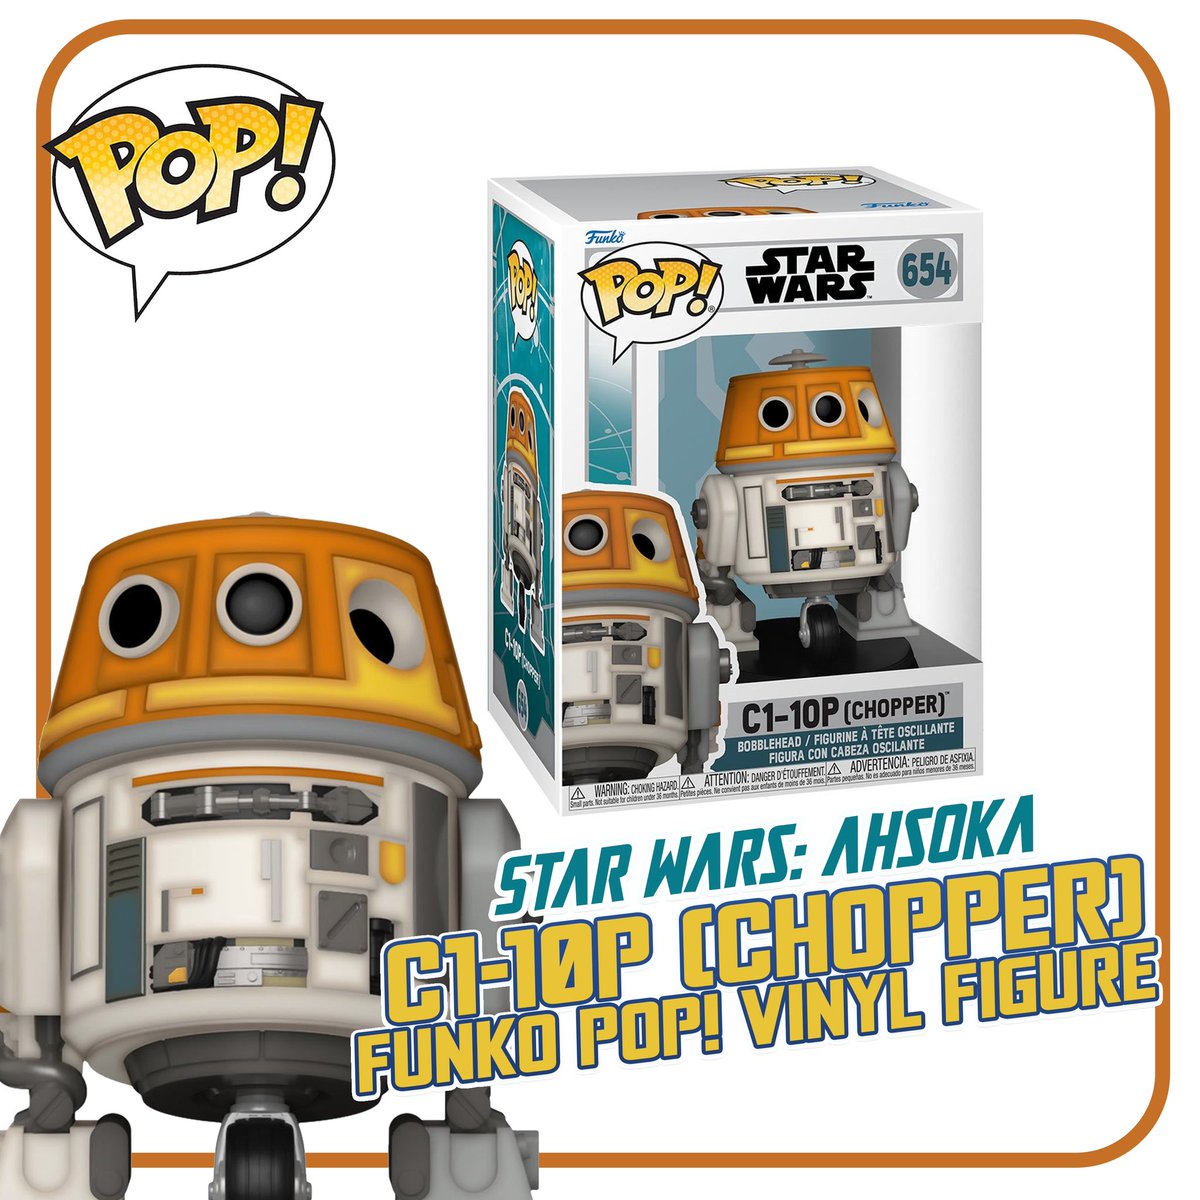 Everyone’s favorite war criminal is now a #Funko Pop! figure! And he can be yours now, courtesy of @EntEarth!

Buy here 👉 ow.ly/nMxe50PYizO

#Ad #FreeProduct #iCollectAtEE #EntertainmentEarth #Affiliate #StarWars #StarWarsRebels #Chopper #Ahsoka #Droid #FunkoPop